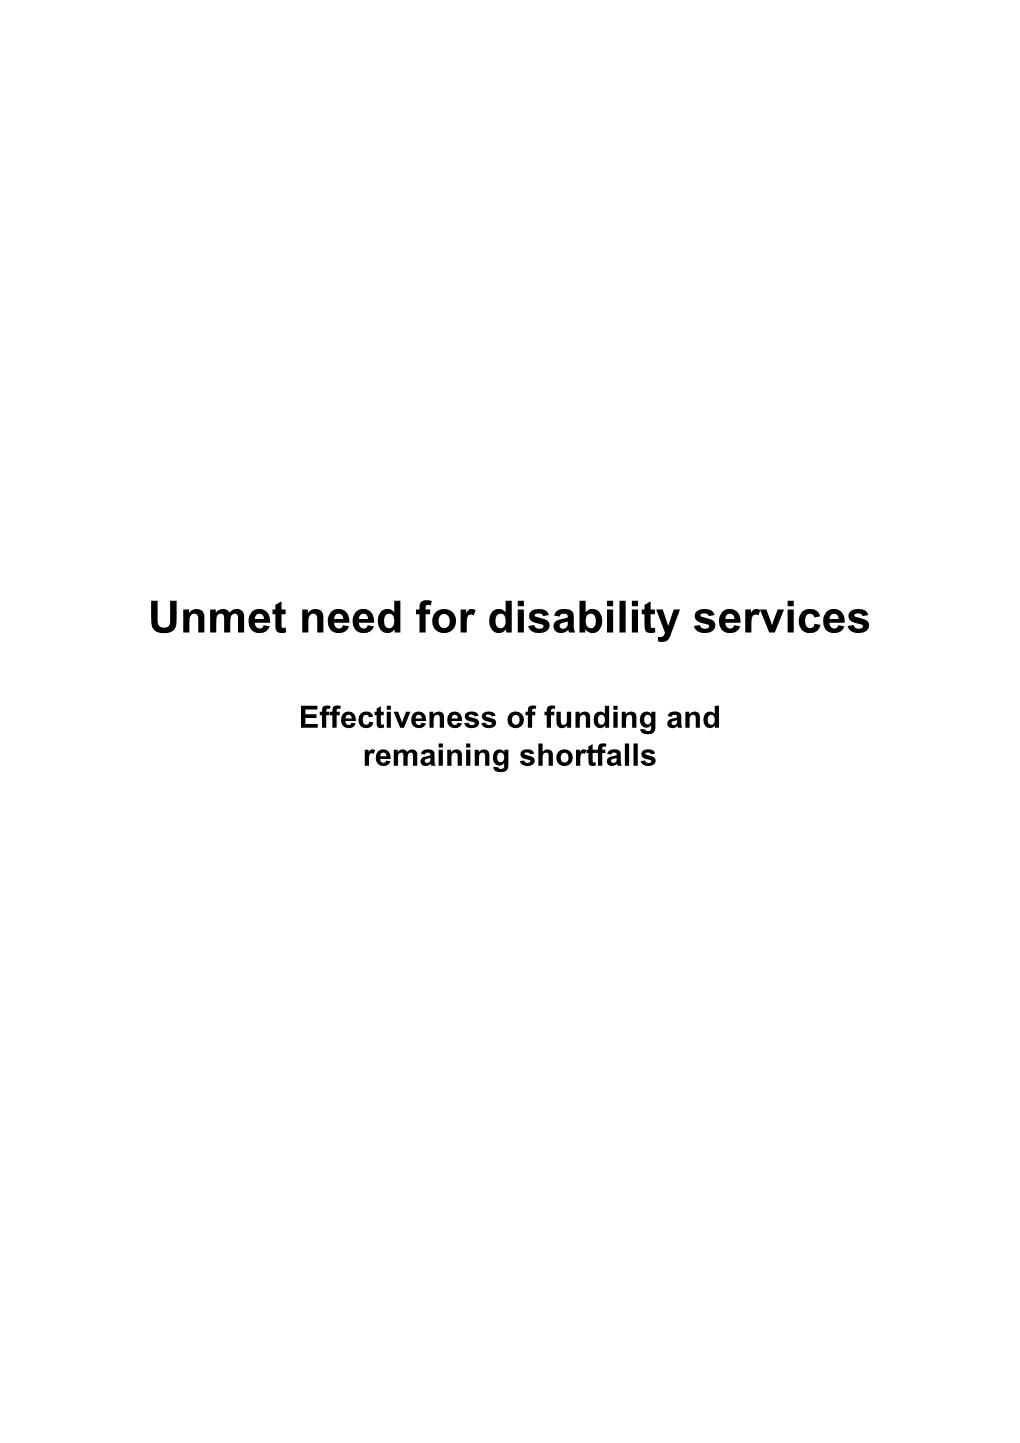 Unmet Need for Disability Services